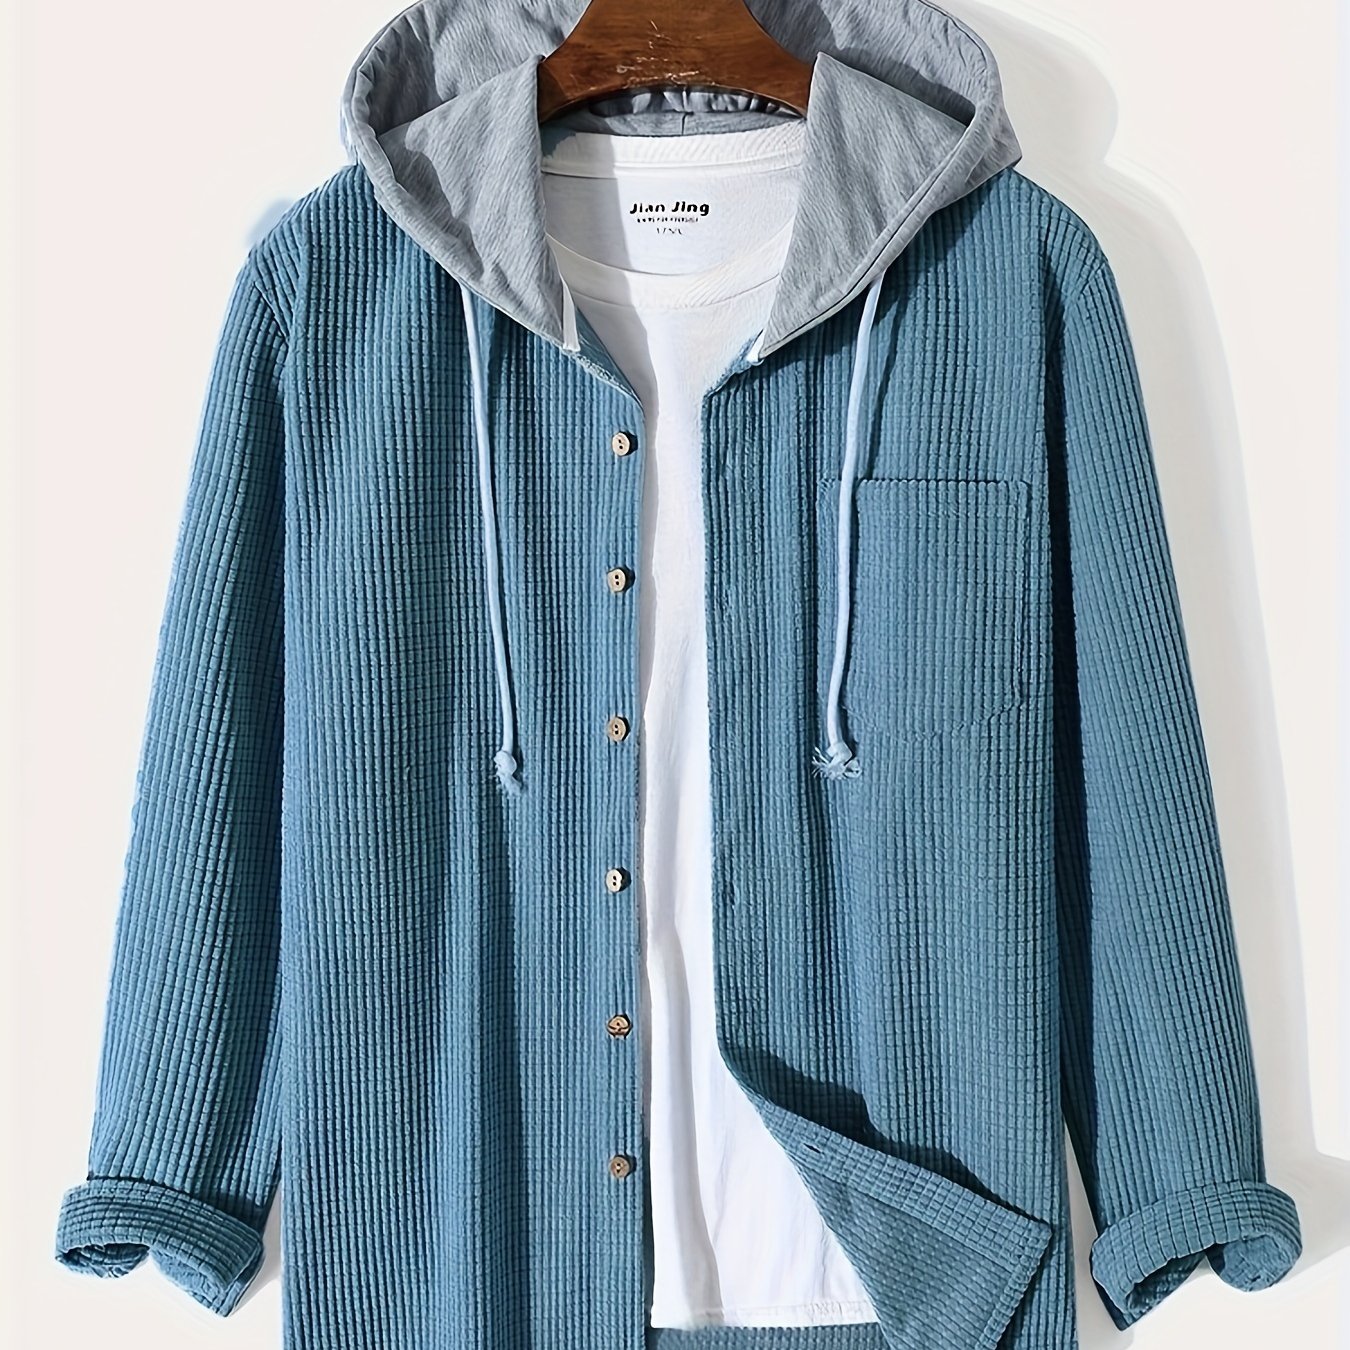 Antmvs Waffle Pattern Hoodie Shirt Coat For Men Long Sleeve Casual Regular Fit Button Up Hooded Shirts Jacket